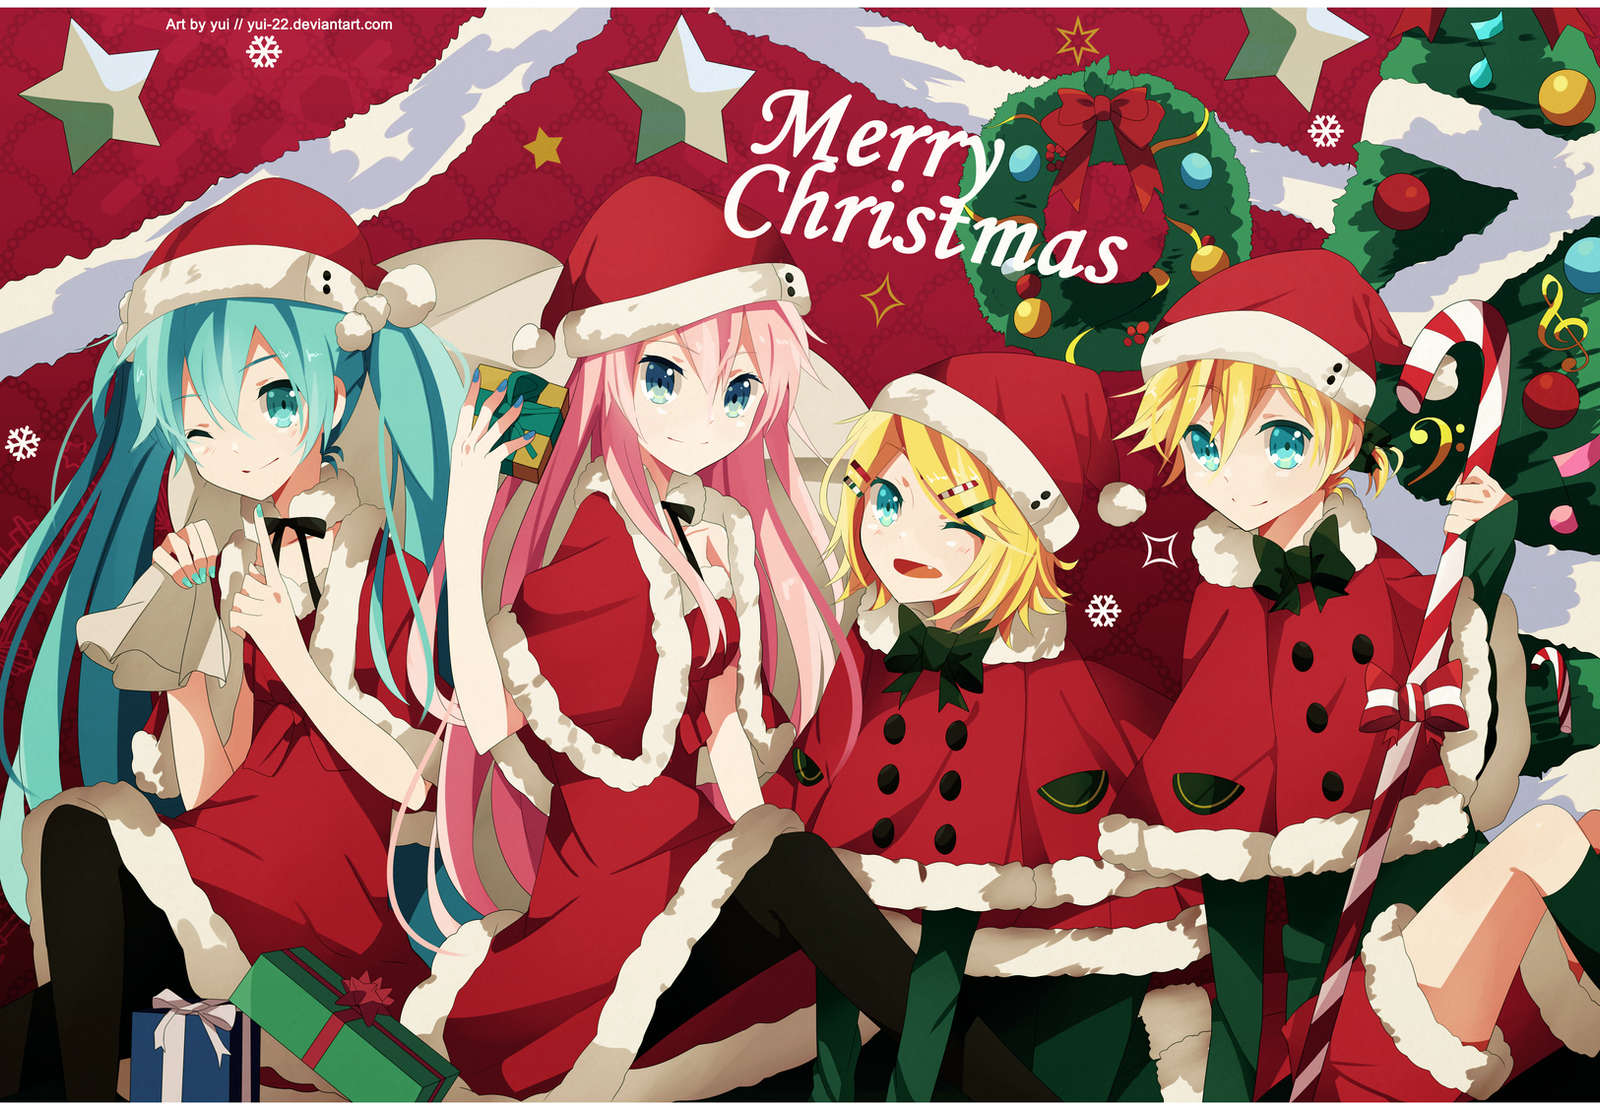 Merry Christmas 2013 by yui-22 on DeviantArt